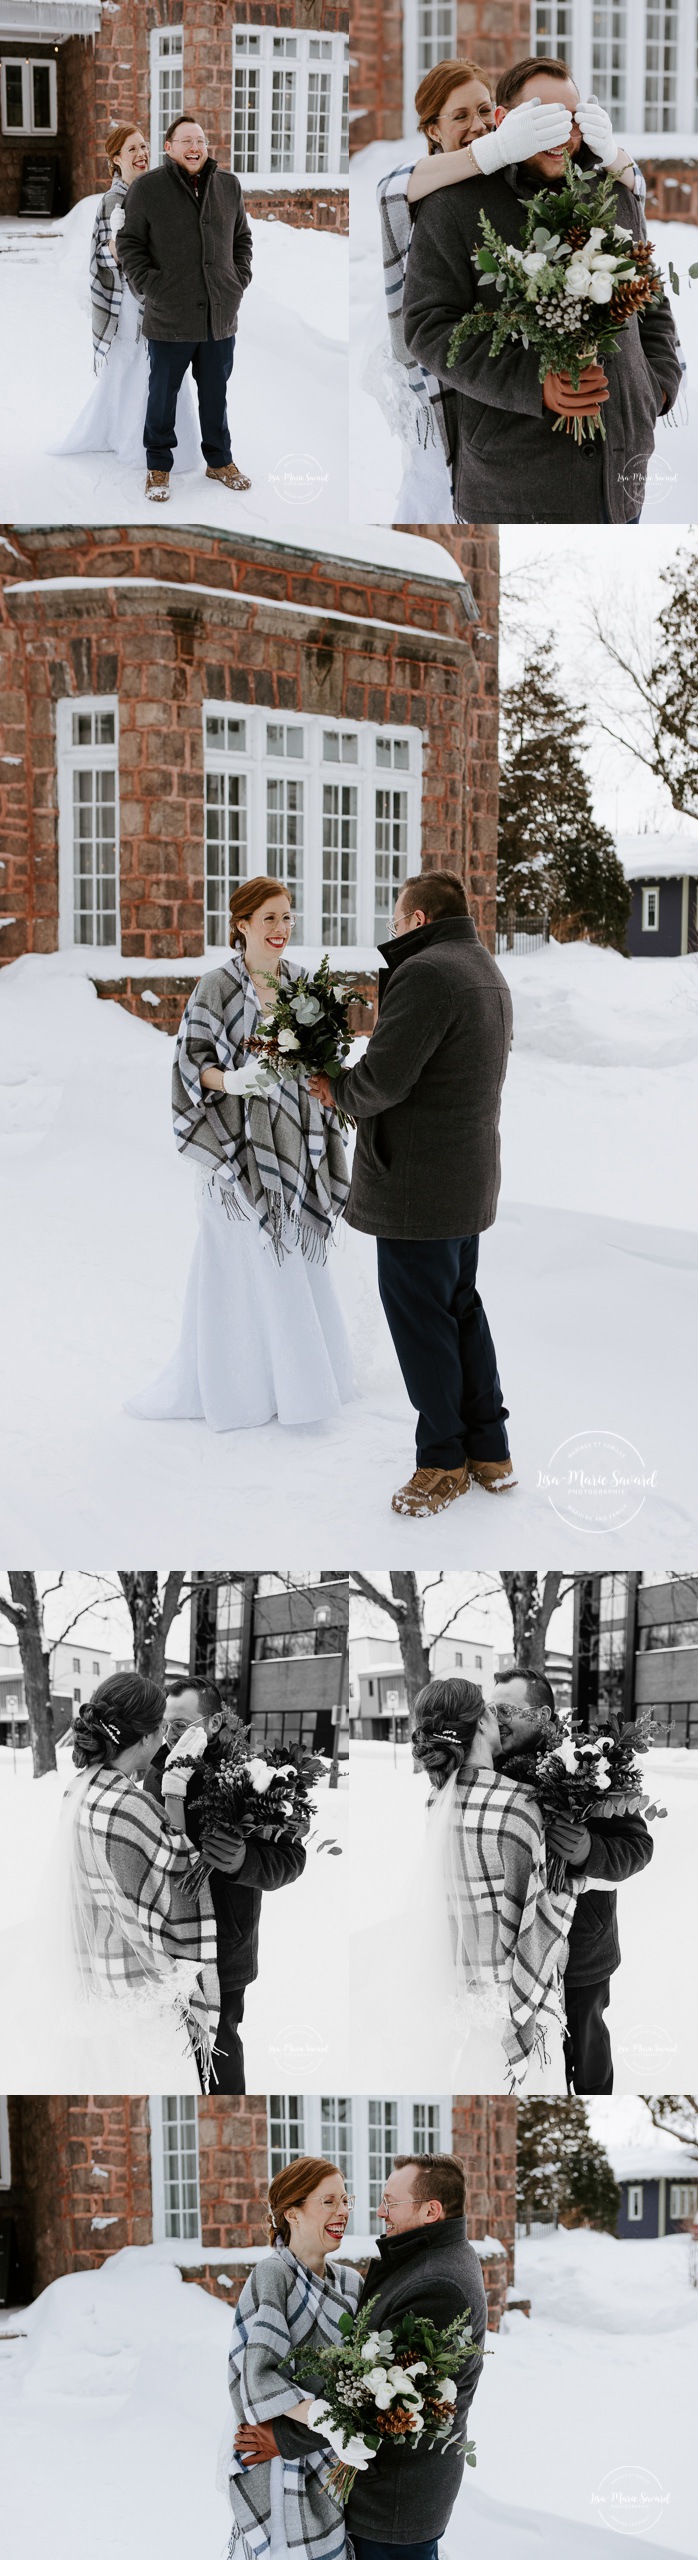 Winter first look. Wedding first look in the snow. Winter wedding photos. Mariage à Chicoutimi en hiver. Photographe de mariage au Saguenay. Maison John Murdock Chicoutimi.